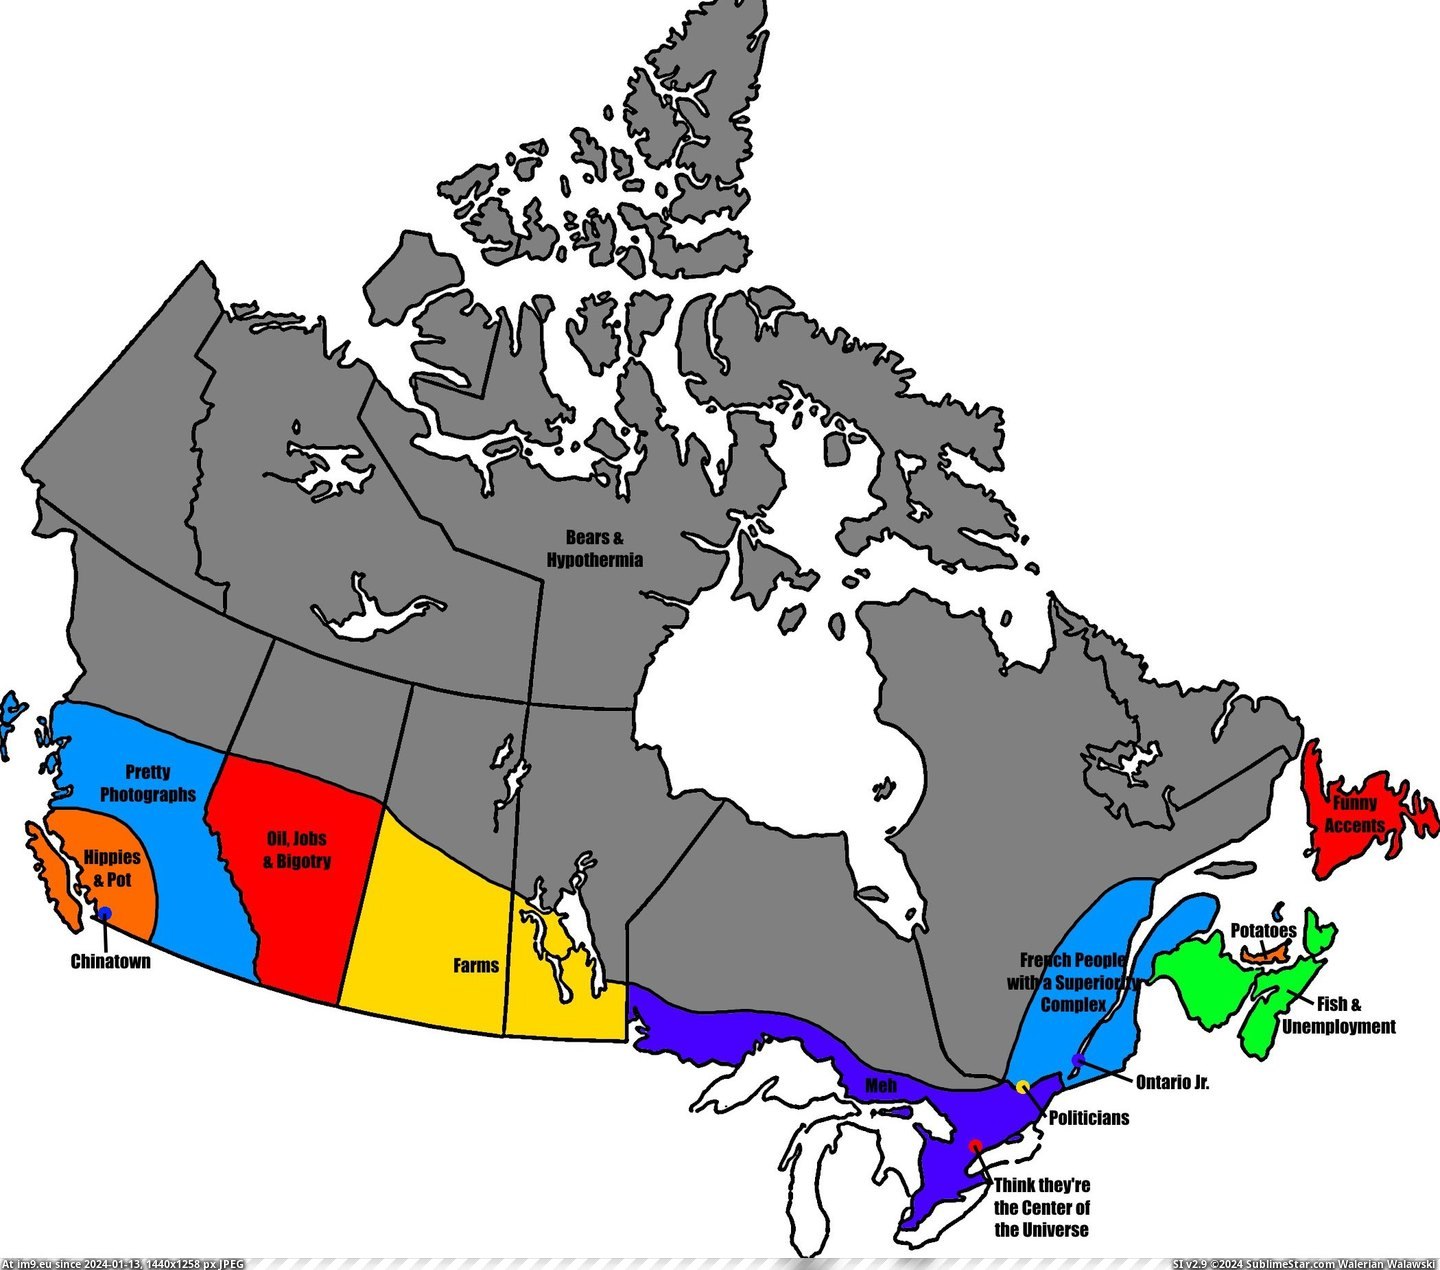 #Thought #Canada #France #Stereotypes #Stereotype #Popular #Maps #Nova [Mapporn]  Since the UK and France stereotype maps were so popular I thought I'd do my home. Stereotypes of Canada from a Nova S Pic. (Bild von album My r/MAPS favs))